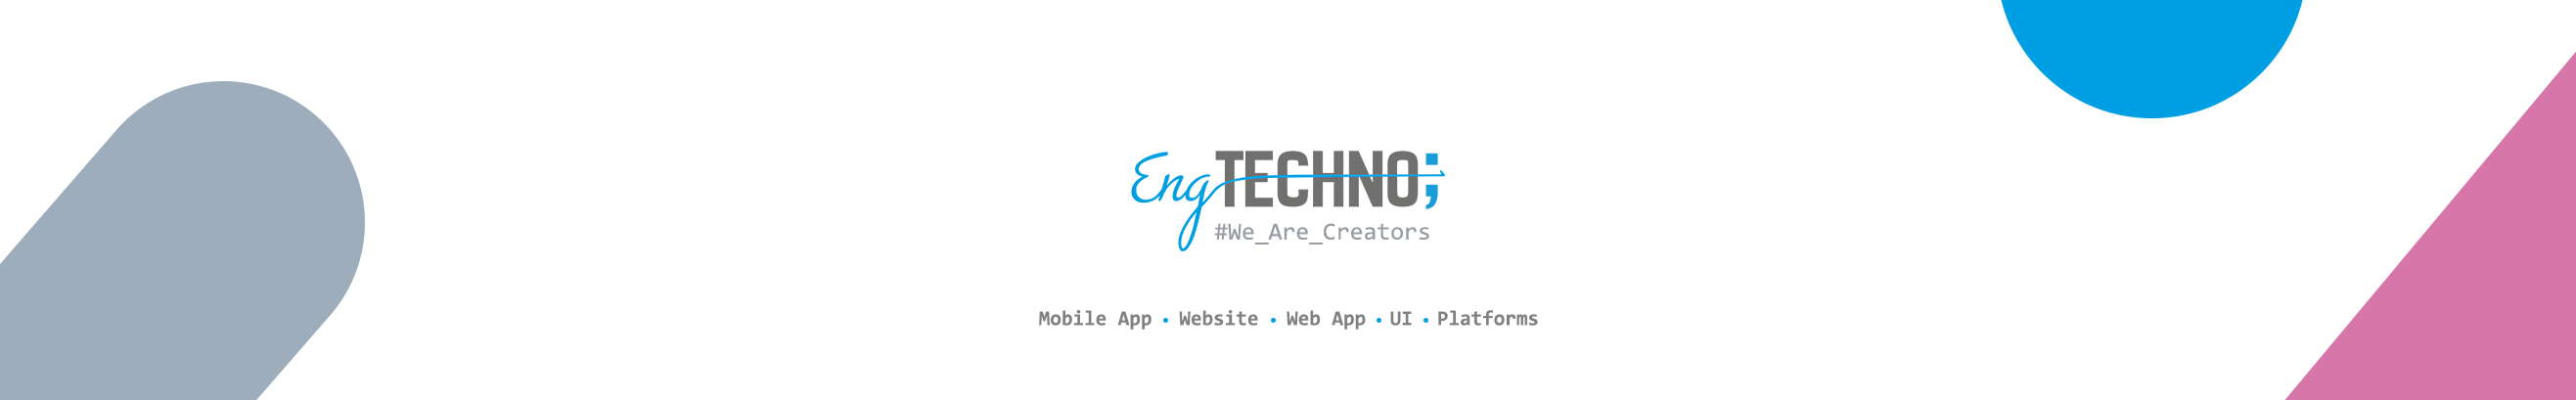 Eng Techno's profile banner